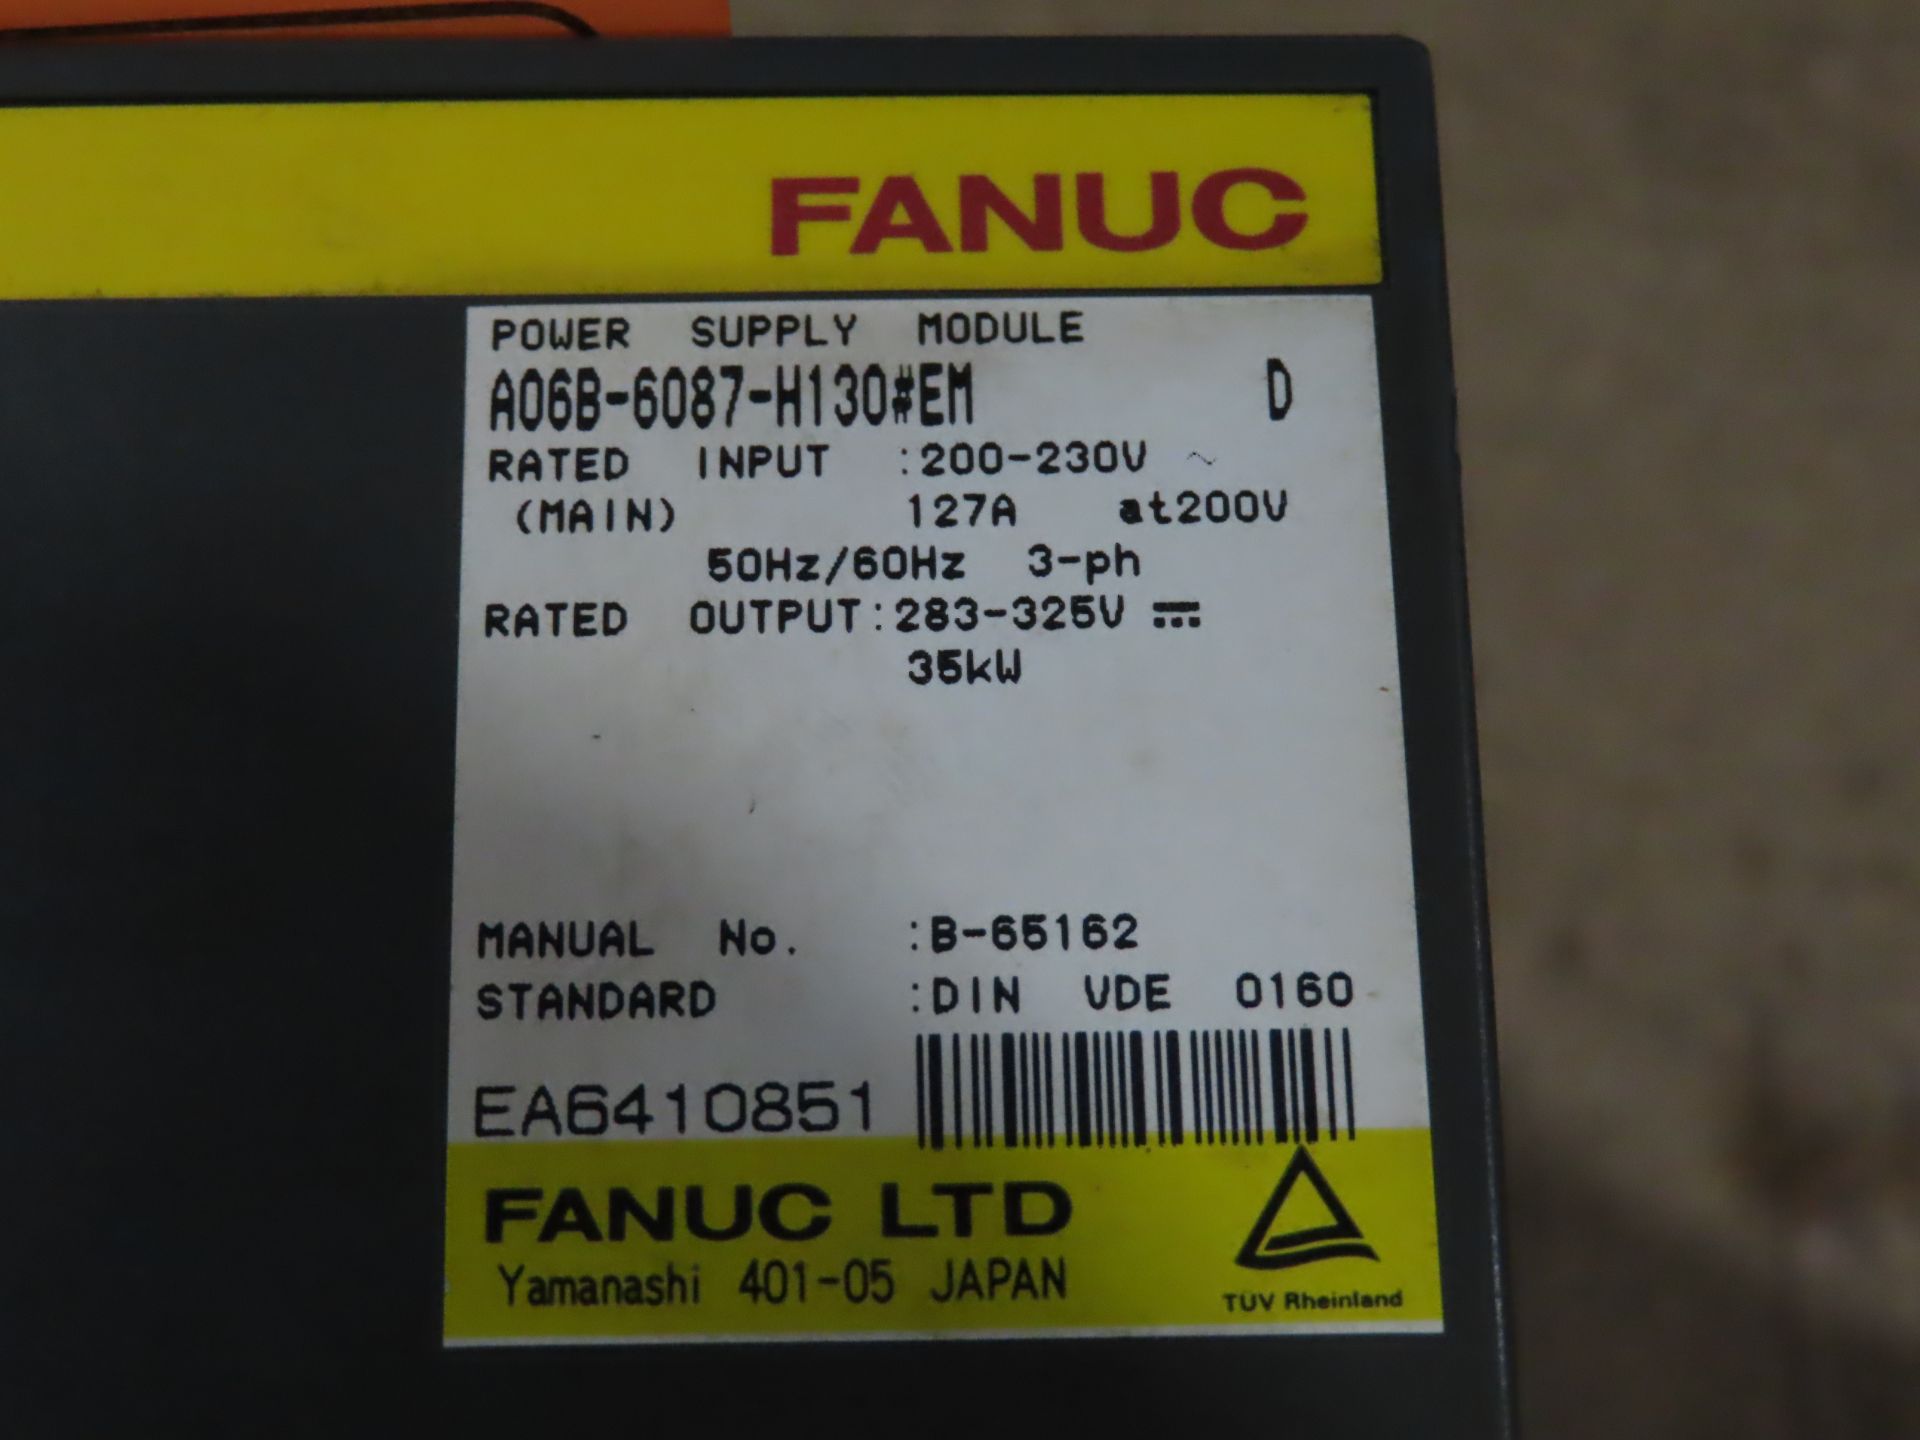 Fanuc power supply model A06B-6087-H130, used parts crib spare, as always with Brolyn LLC - Image 2 of 2